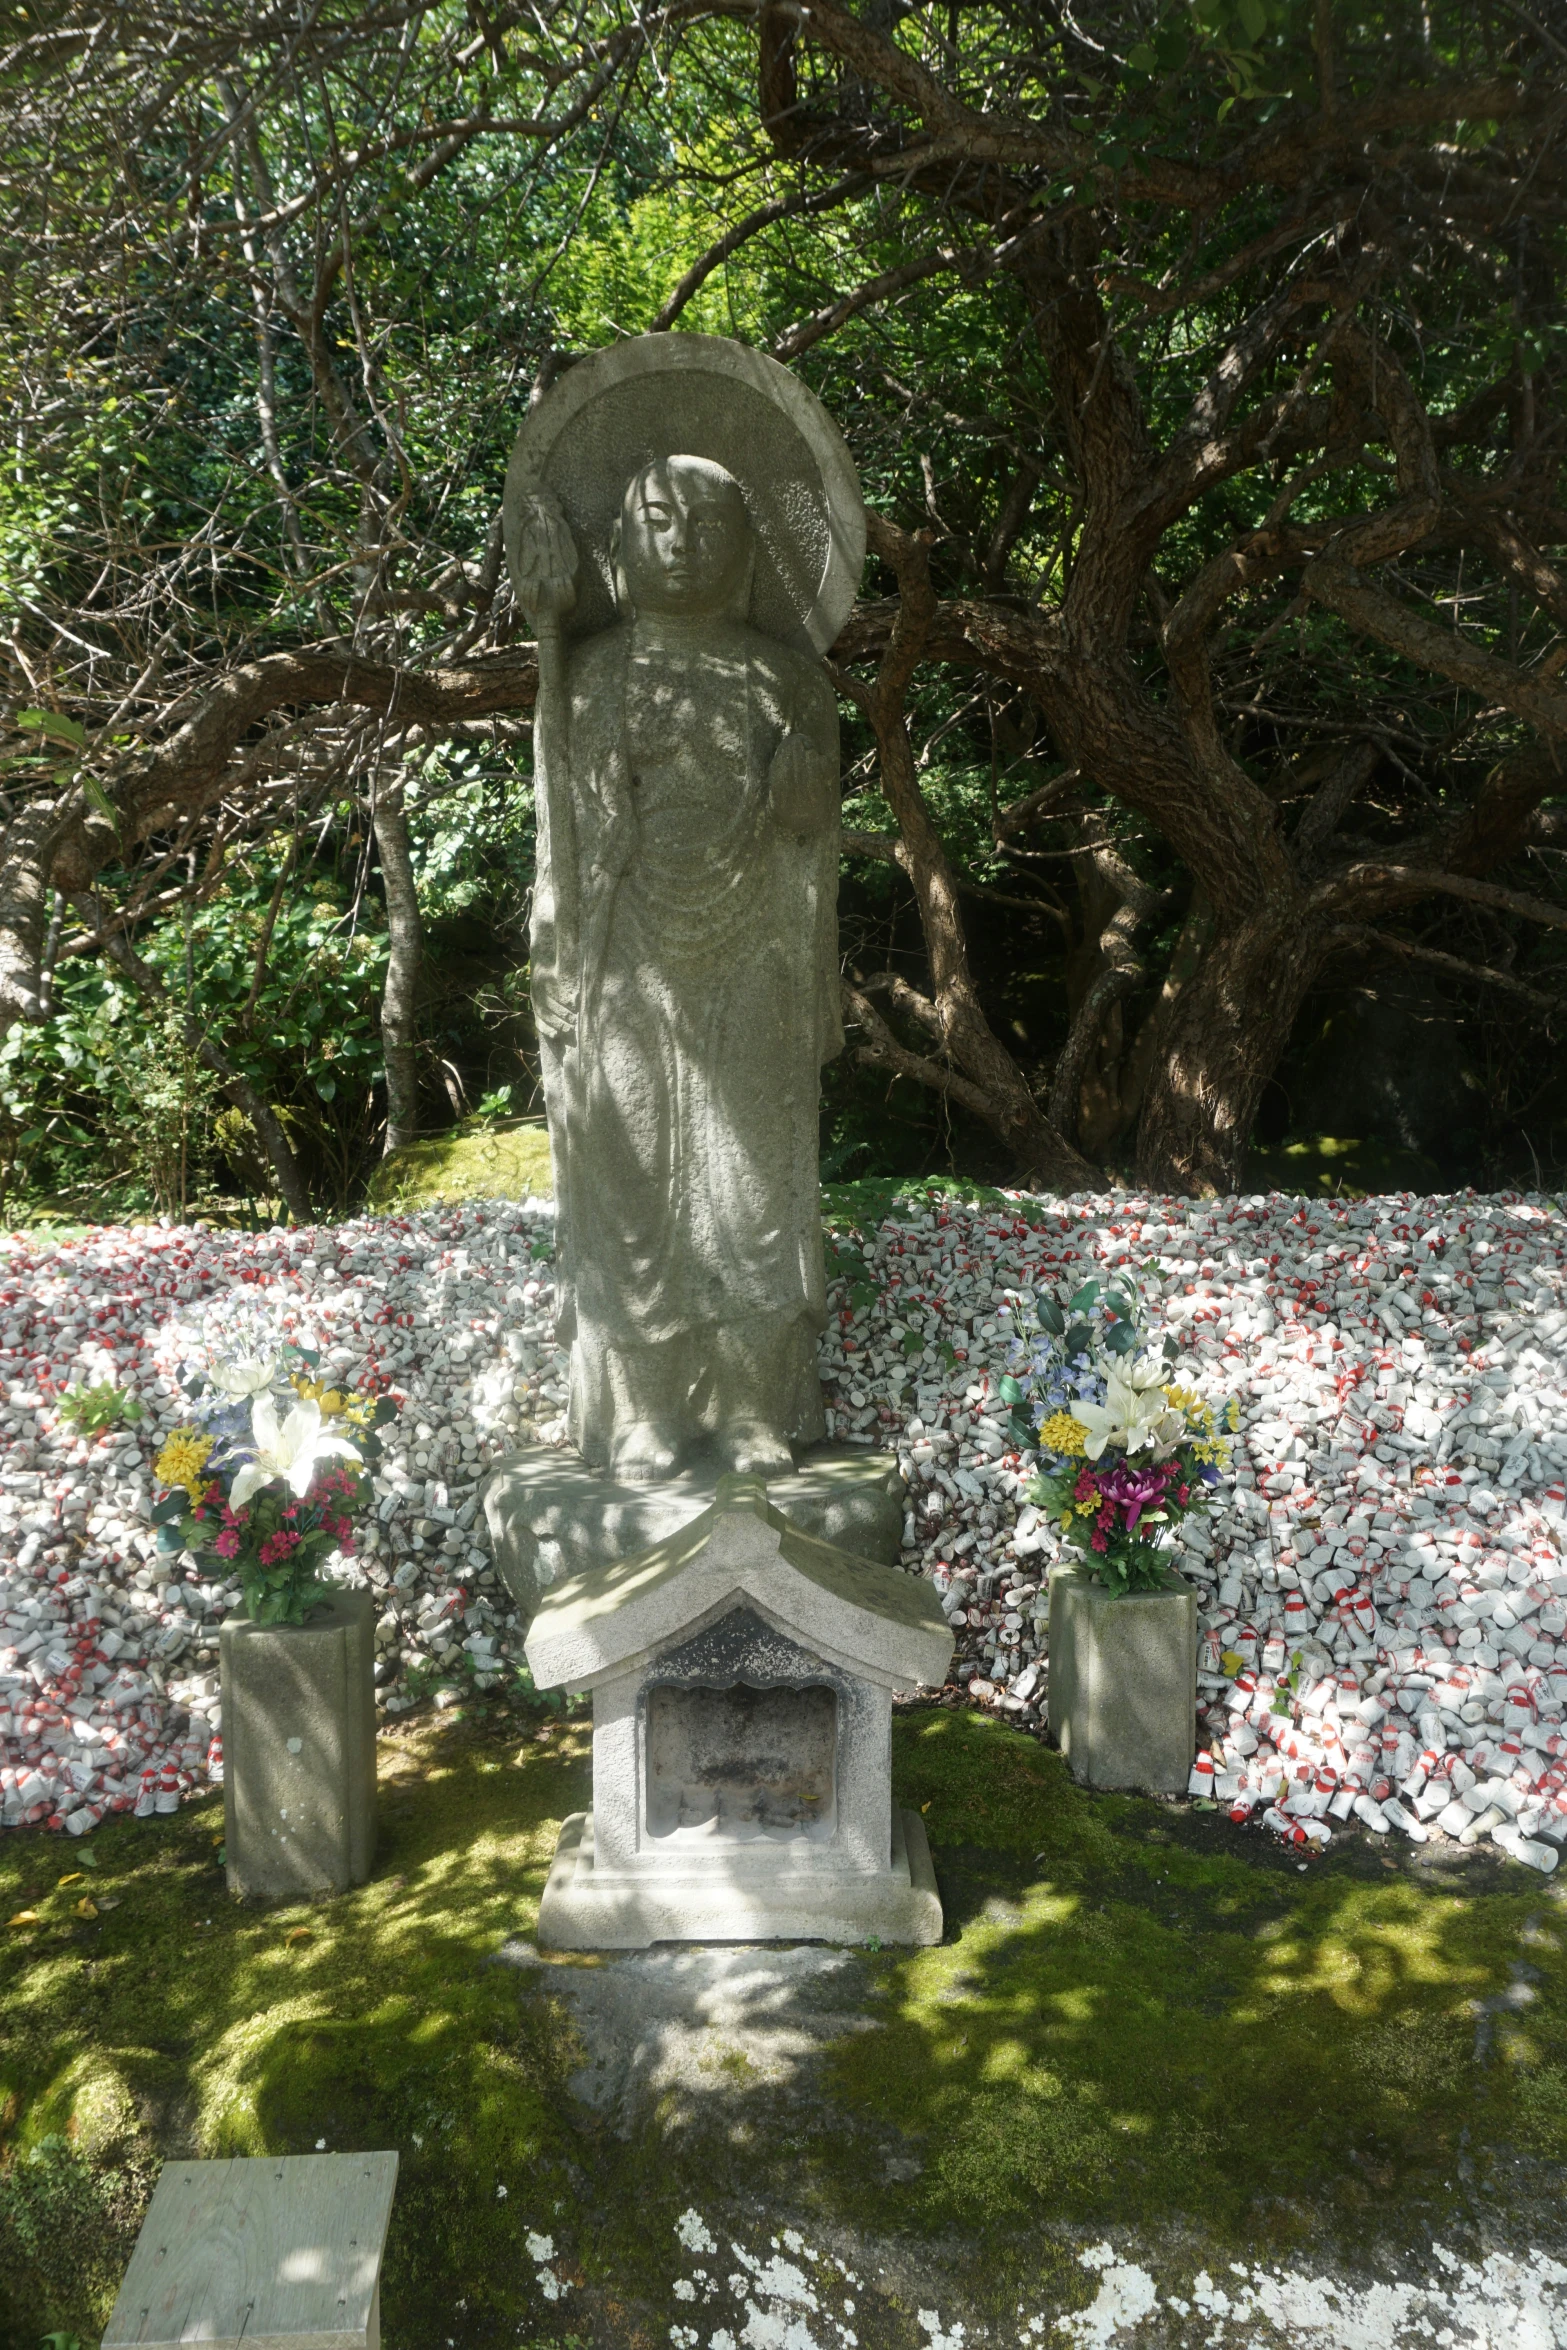 a stone statue in the middle of some flowers